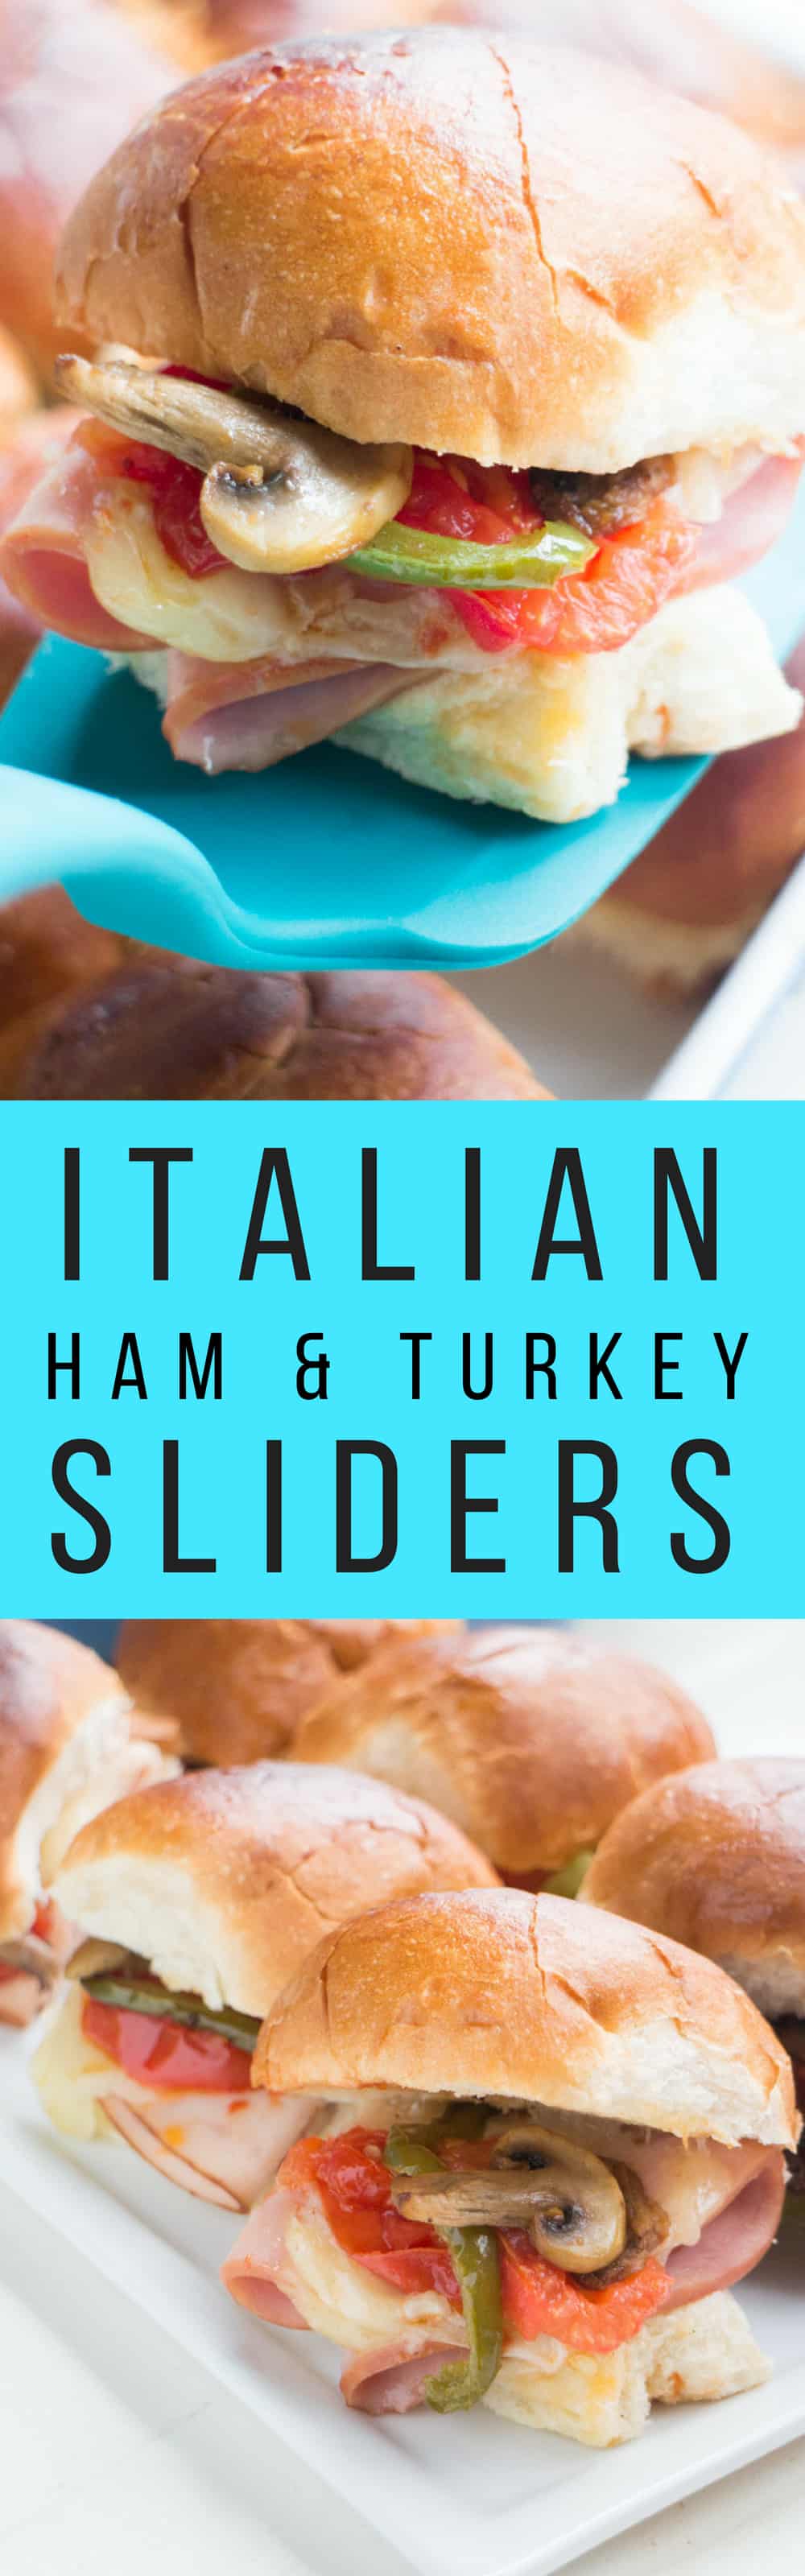 ITALIAN Ham and Turkey Sliders with ROASTED Vegetables on Hawaiian Sweet Rolls! This mini sandwich recipe is so easy to make and makes the perfect meal for dinner, potlucks and party finger foods!  